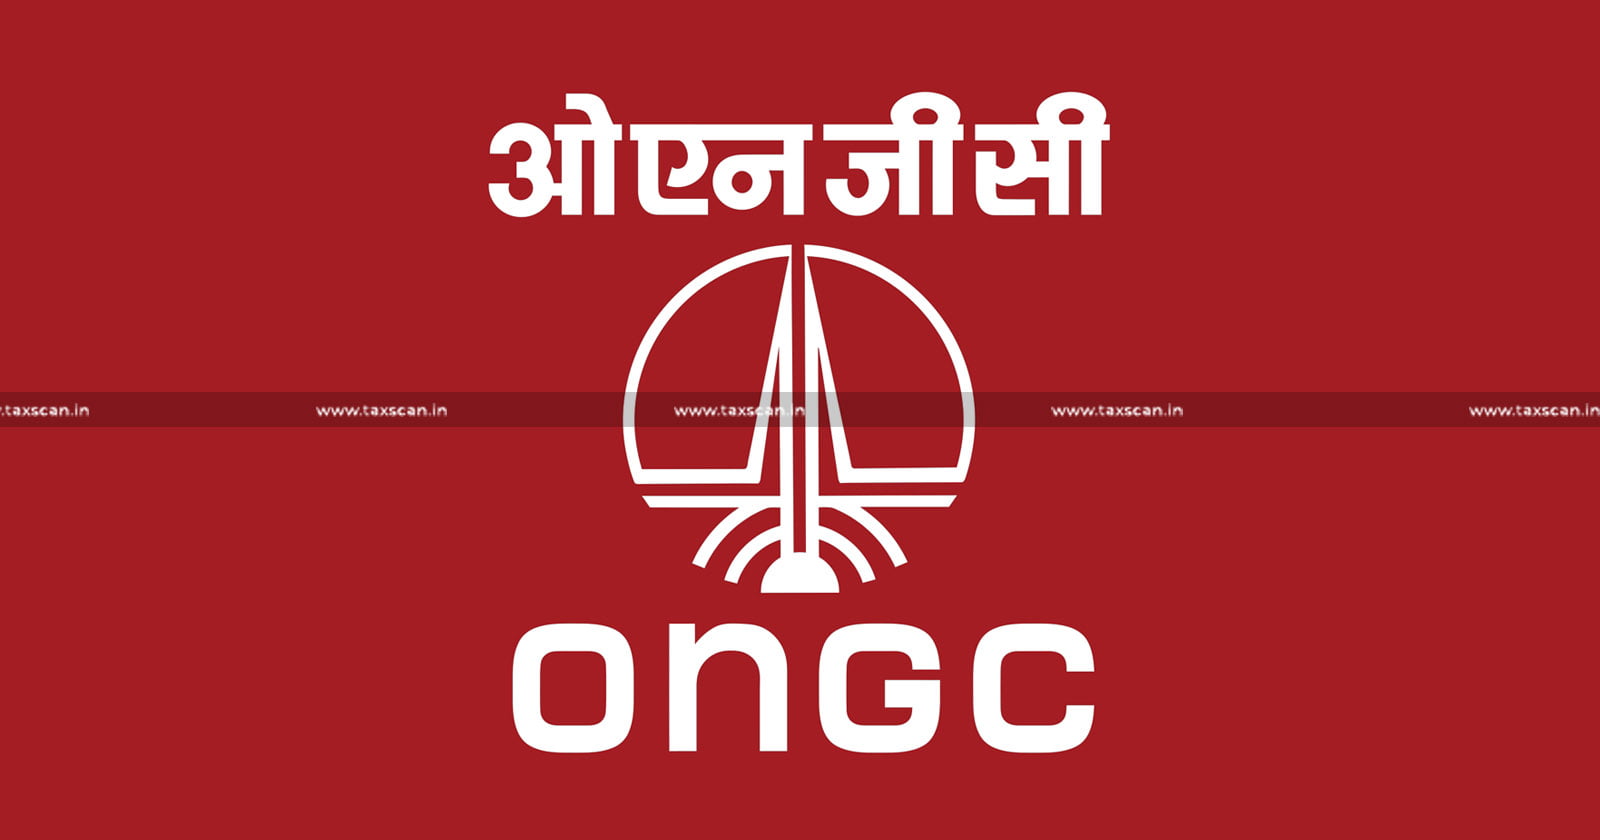 ONGC - Payments - Air Injection - Air Injection Equipment - FTS - India-Canada DTAA - DTAA - ITAT - Income Tax - taxscan